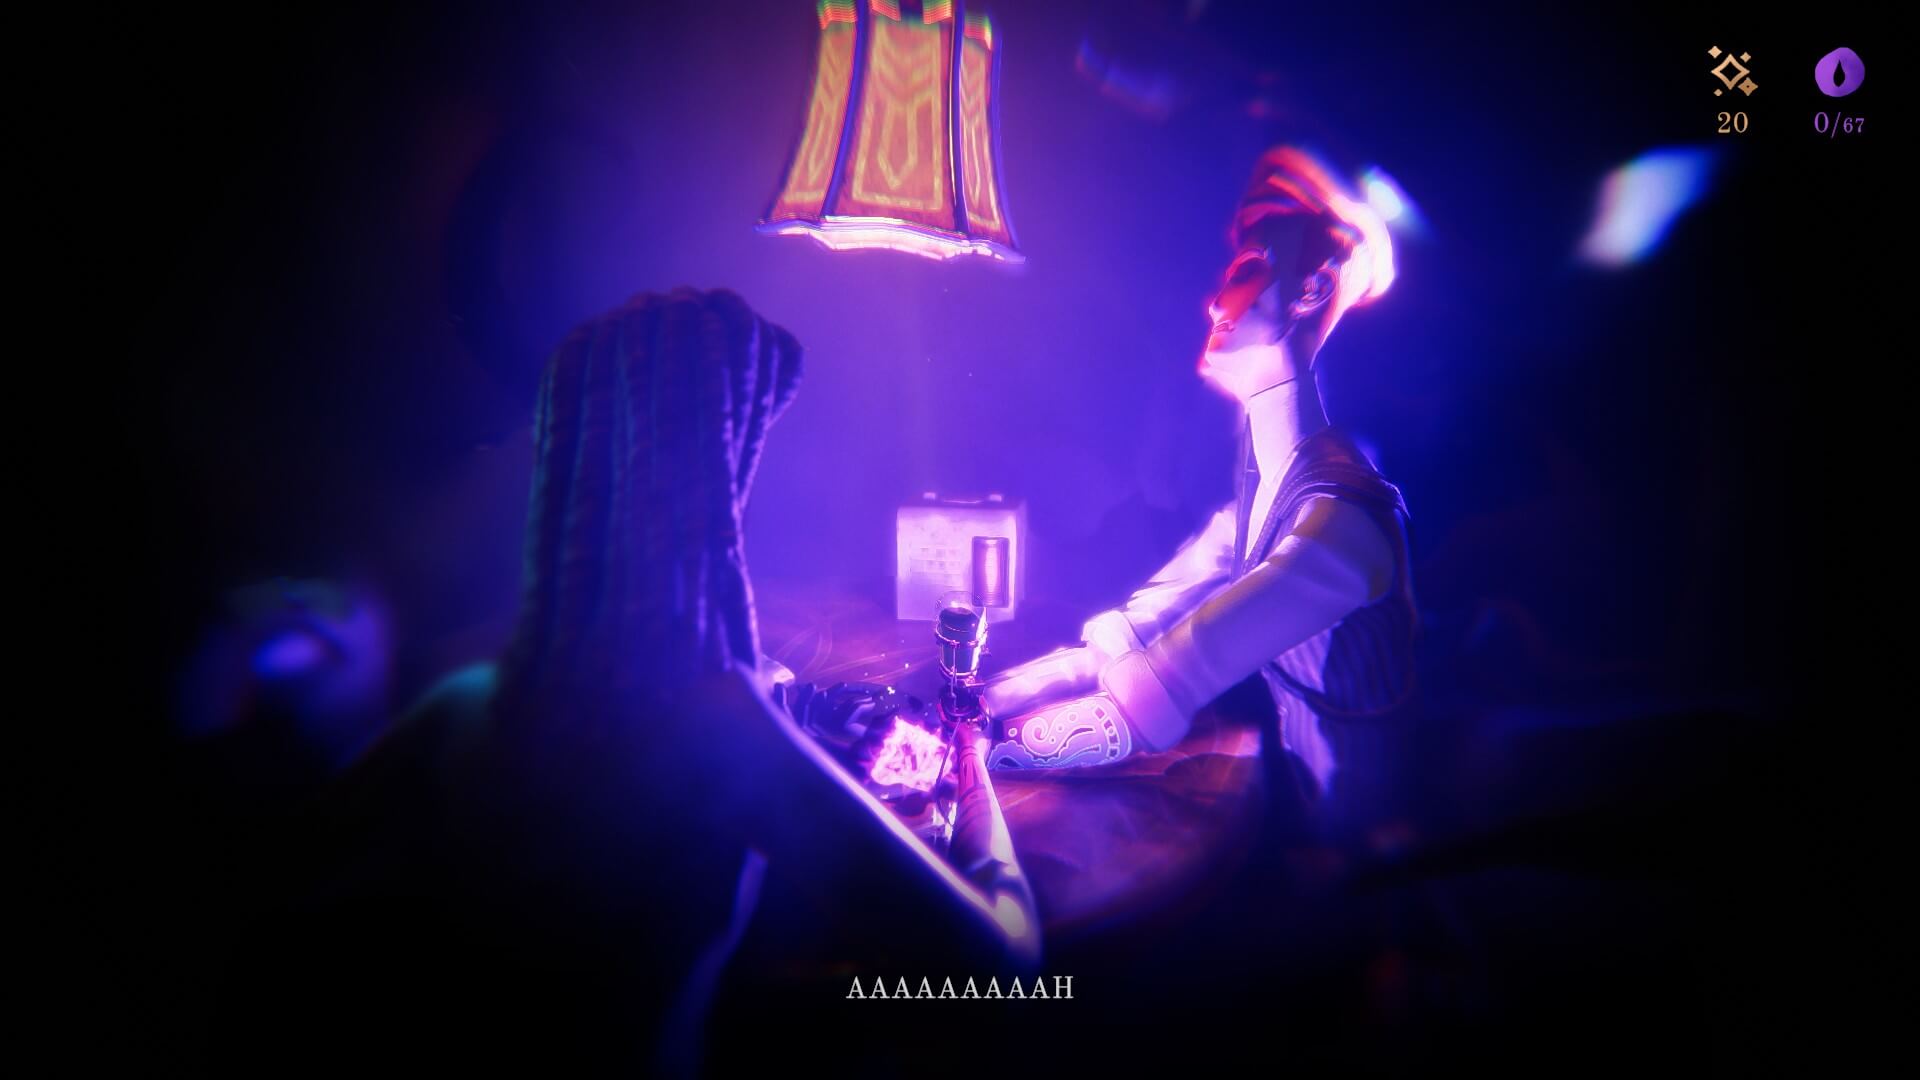 Fox is recieving a tattoo filled with dark energy to boost his power. an orange lamp hangs above and a lady with dreadlocks can be seen with her tattoo needle.